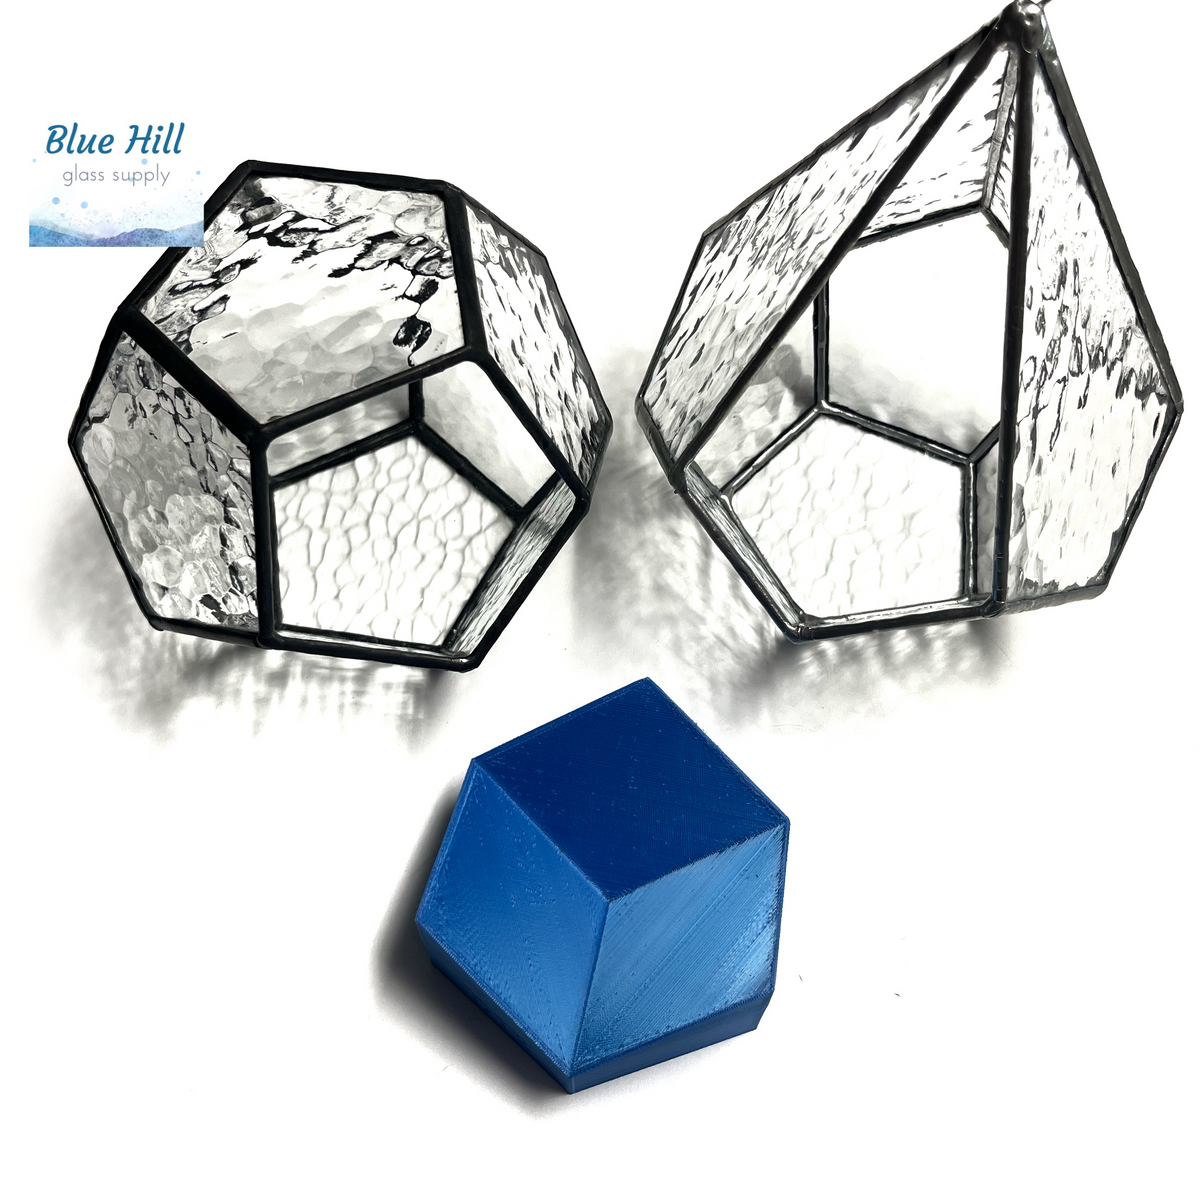 D12 Dodecahedron MOLD for Stained Glass Making - Stained Glass Jig